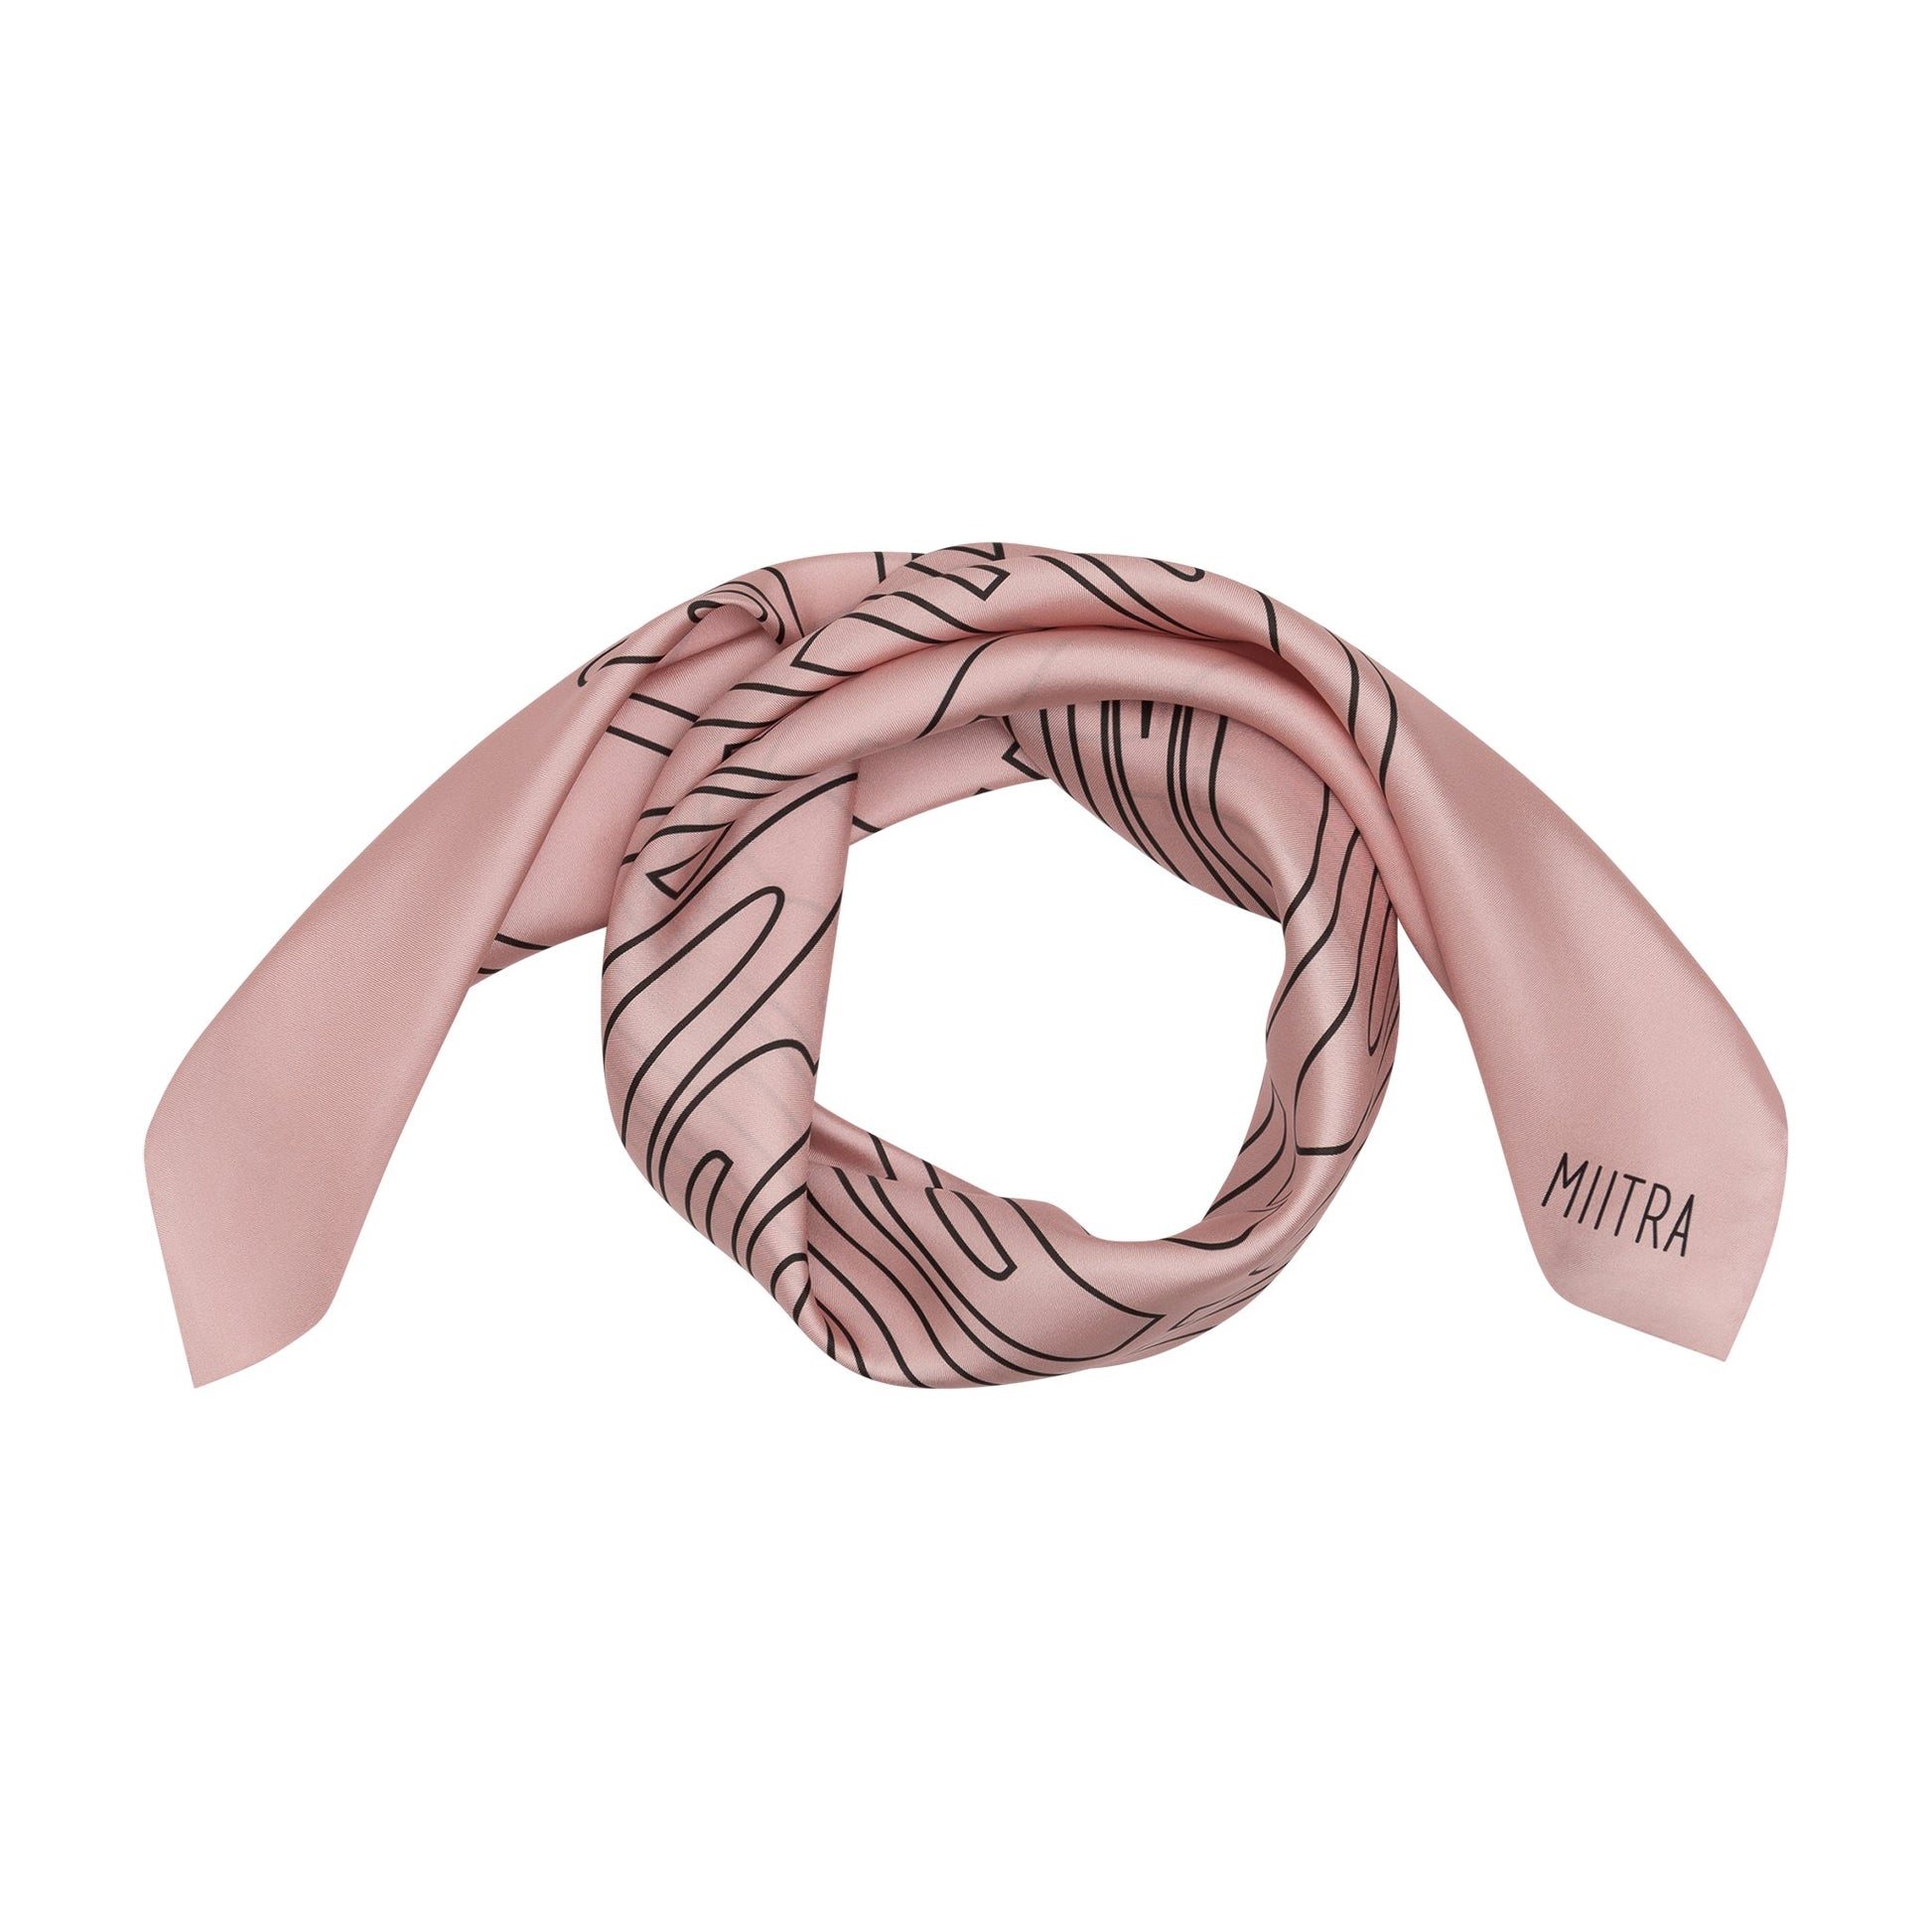 Stylized view of a pink silk scarf?id=22984587641019